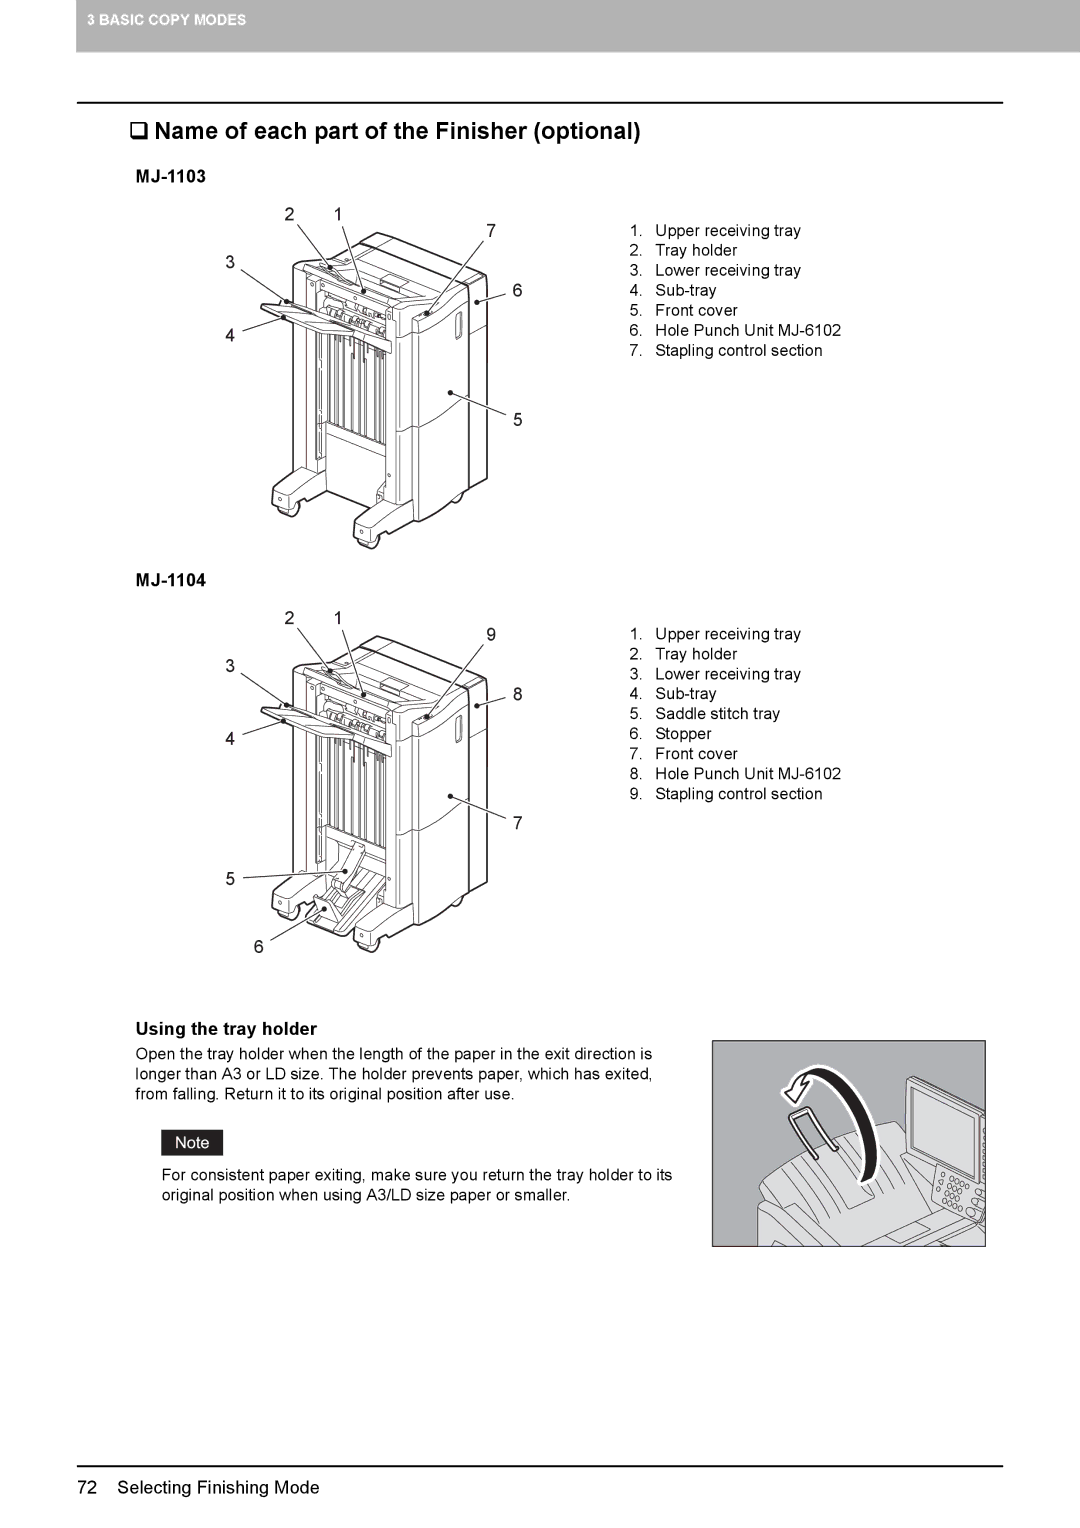 Toshiba 6520c, e-STUDIO5520C manual ‰ Name of each part of the Finisher optional, MJ-1103, MJ-1104, Using the tray holder 